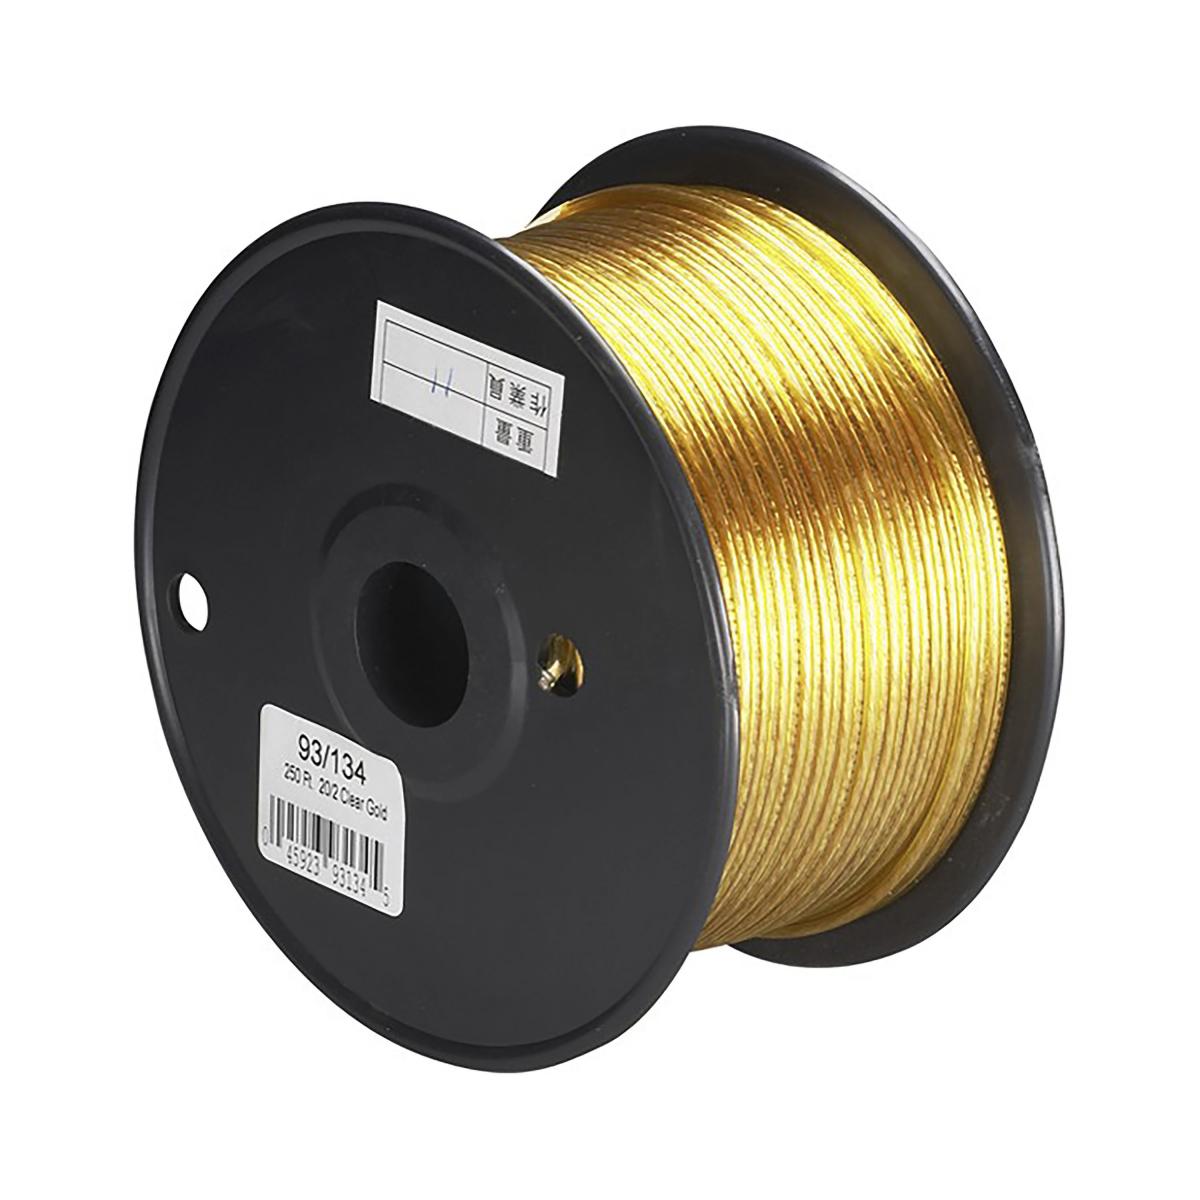 93-134 20/2 CLEAR GOLD WIRE 250 FT.